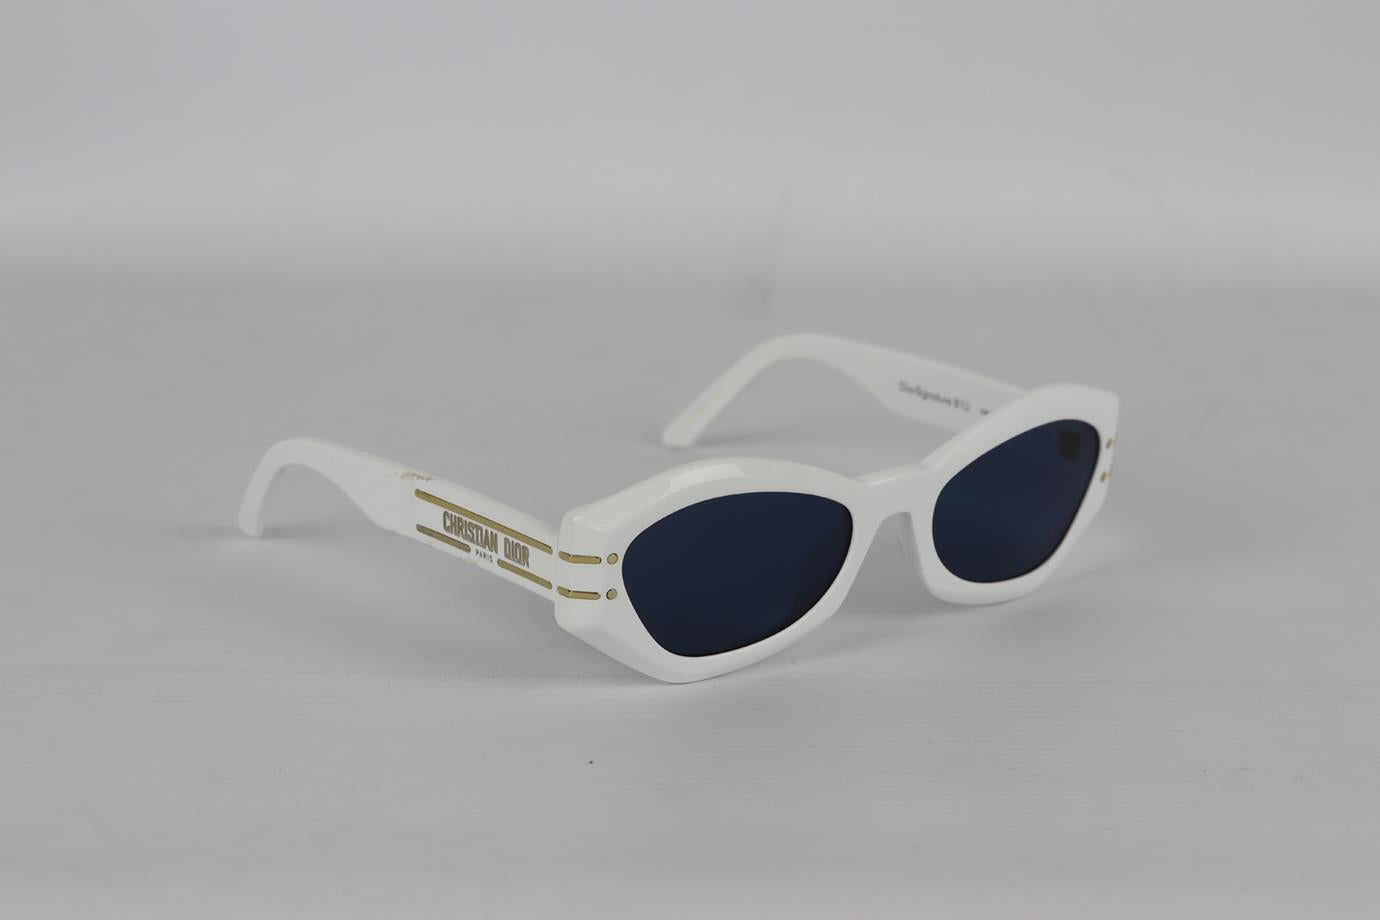 Christian Dior DiorSignature B1U hexagon frame sunglasses. White. Does not come with dustbag or case. Style Code: 50B0. Lens Size: 55 mm. Arm Size: 20 mm. Bridge Size: 135 mm. Very good condition - Few light marks; see pictures.
